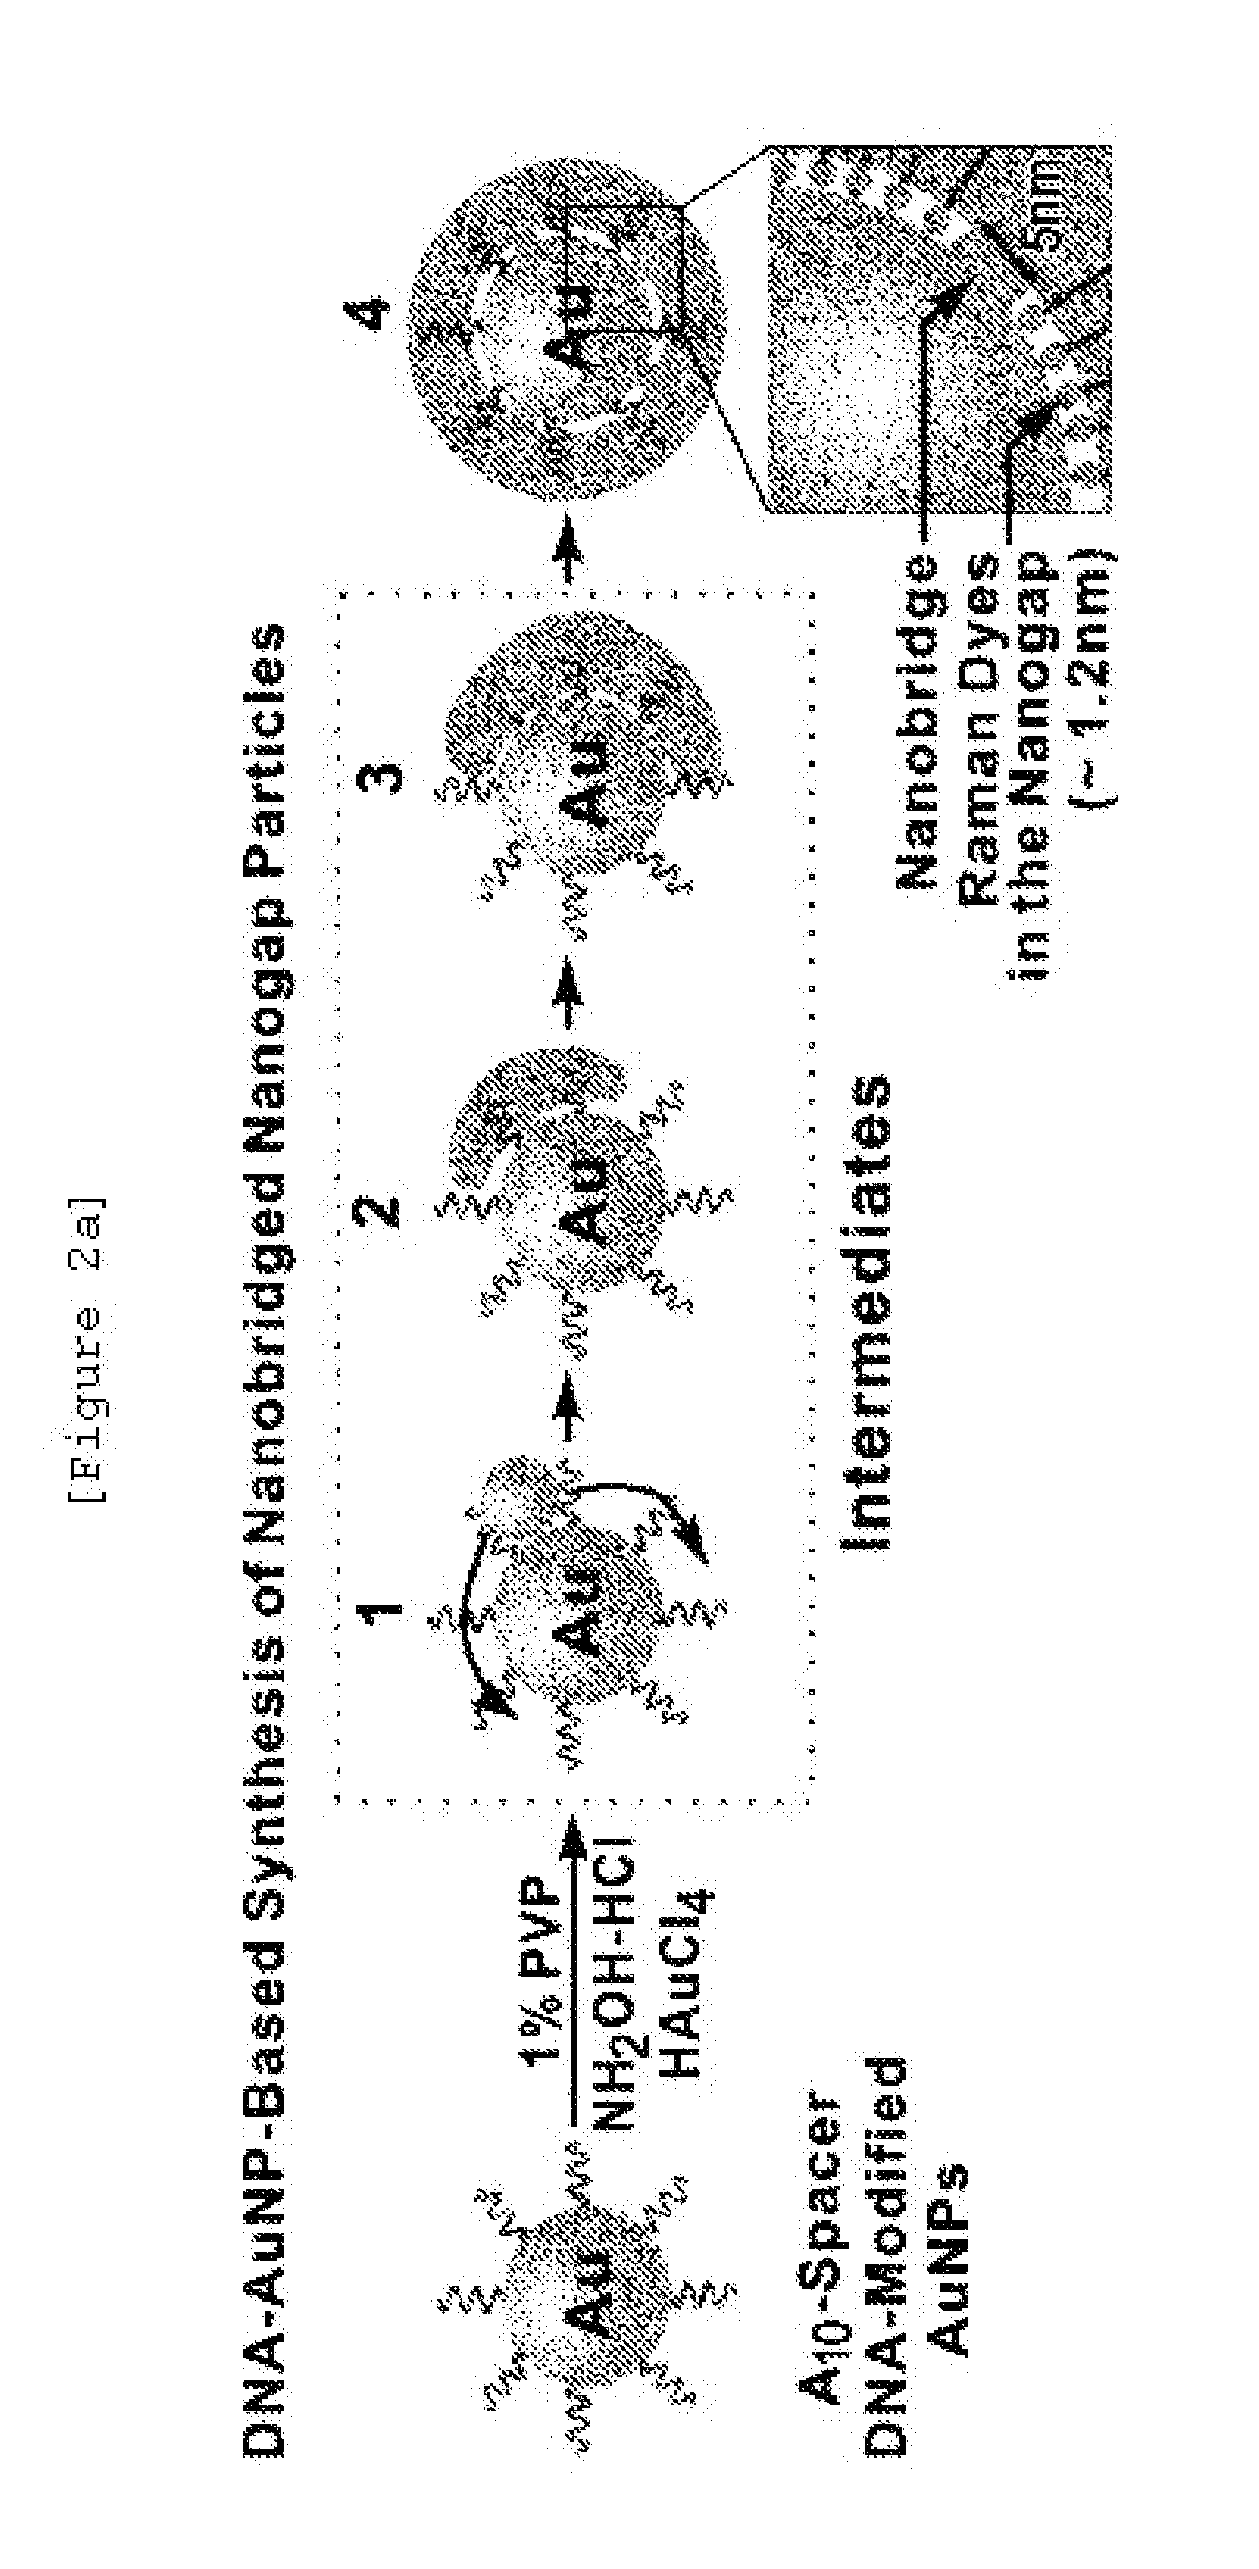 Single nanoparticle having a nanogap between a core material and a shell material, and preparation method thereof